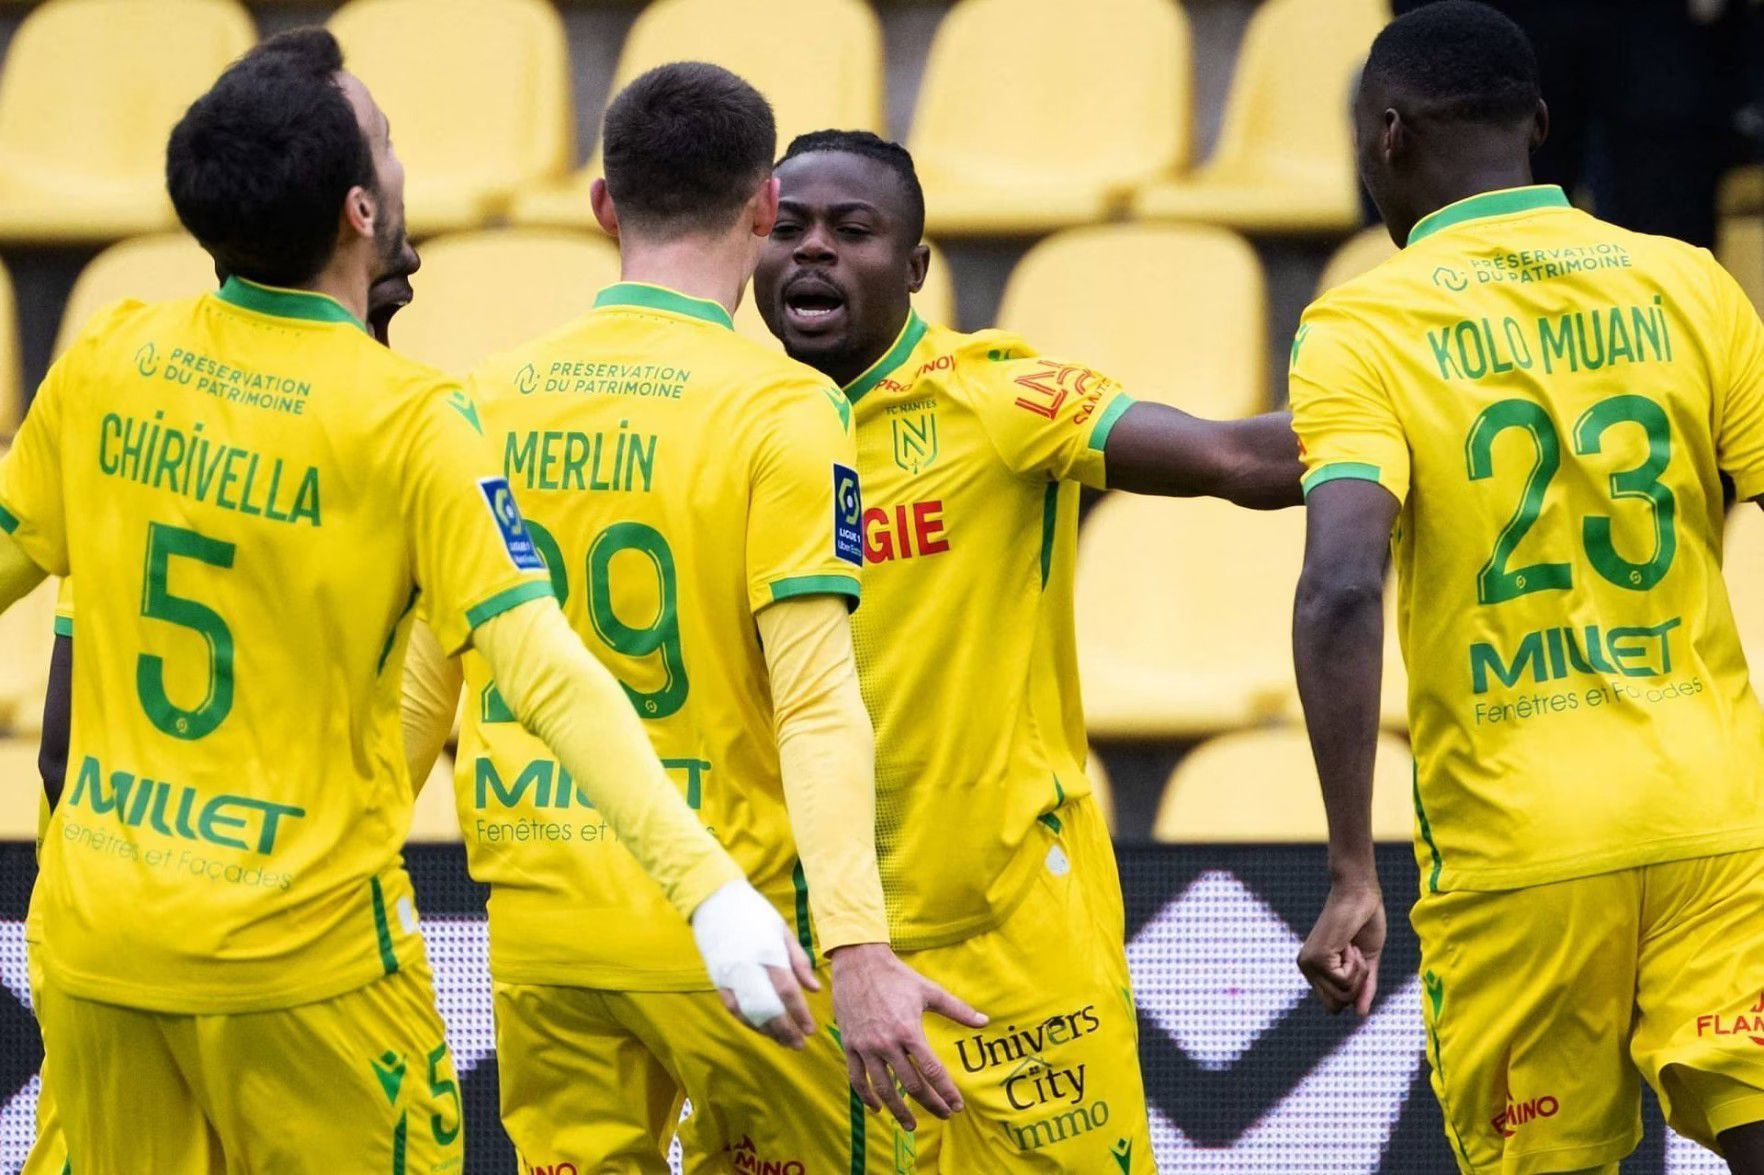 Nantes will face Clermont on Sunday - Ligue 1